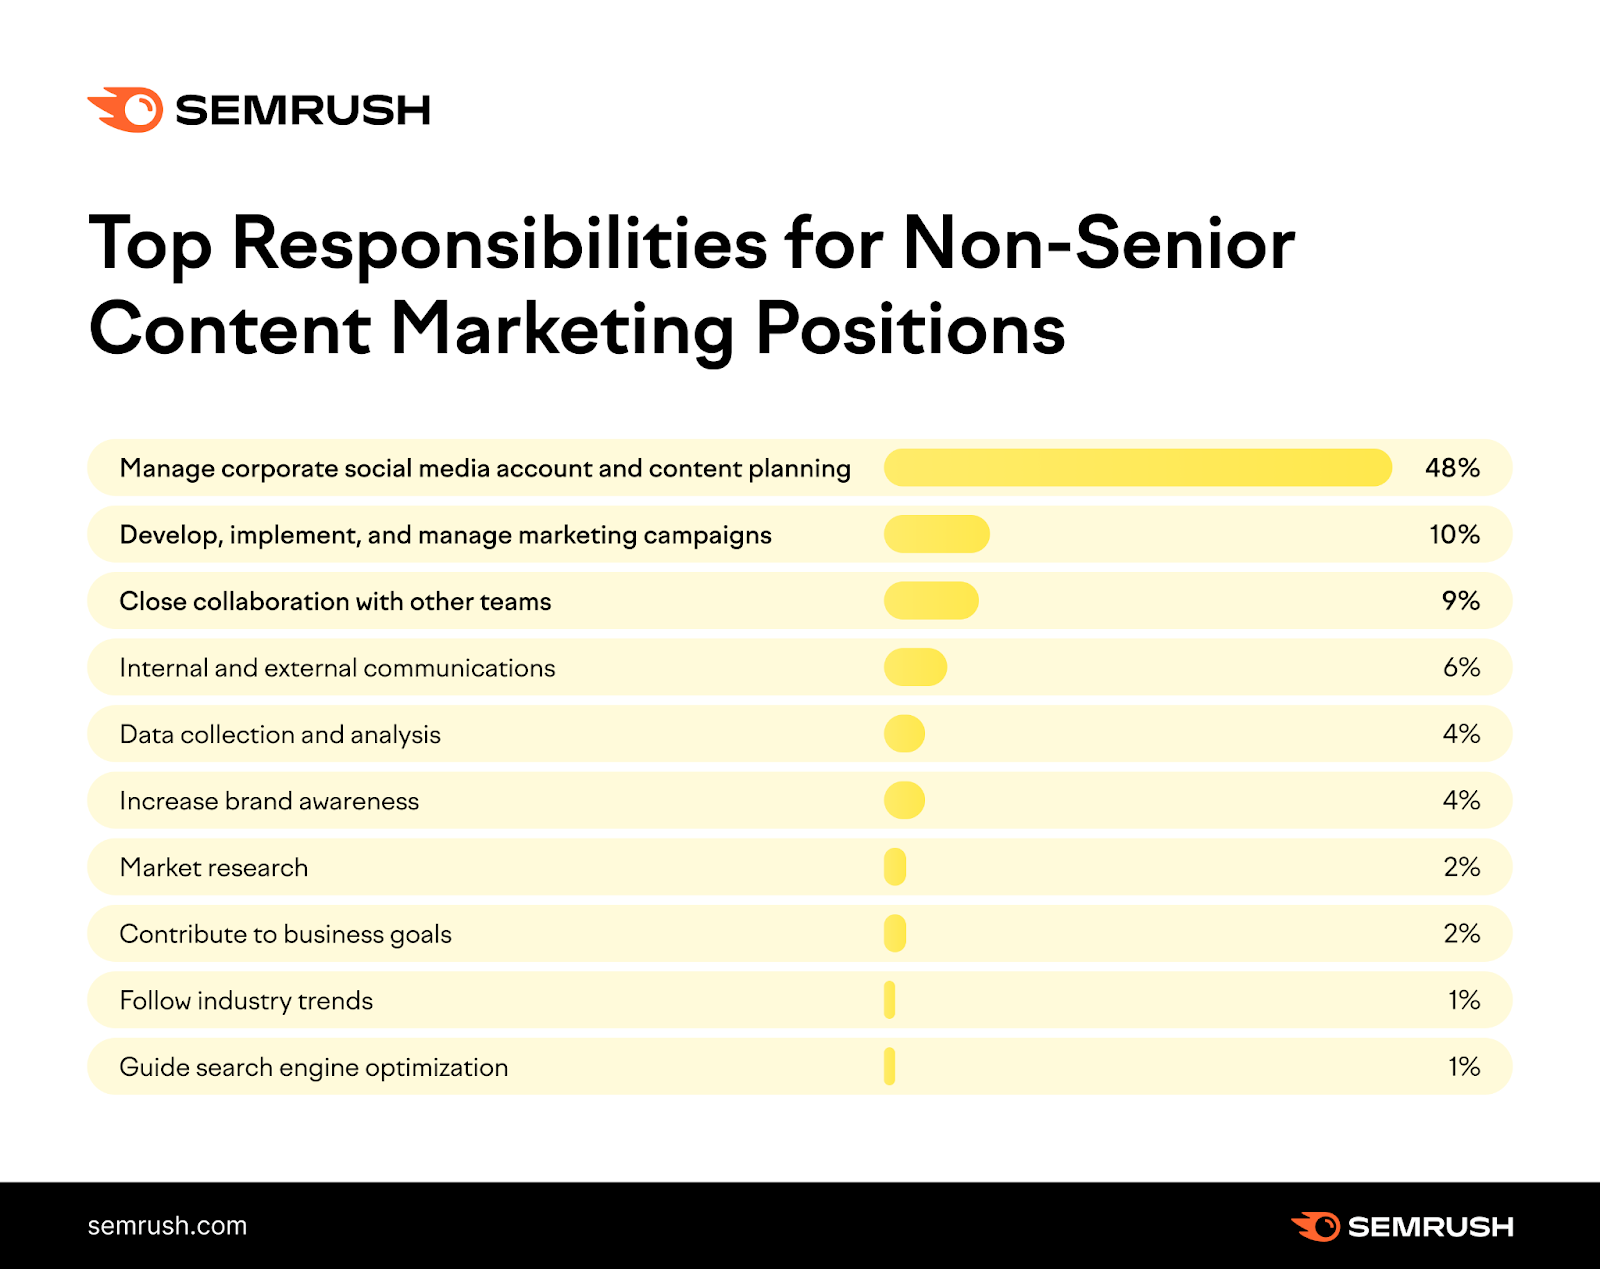 Top responsibilities for non senior content marketing positions: Managing social media, content planning, marketing campaigns, collaboration, and more